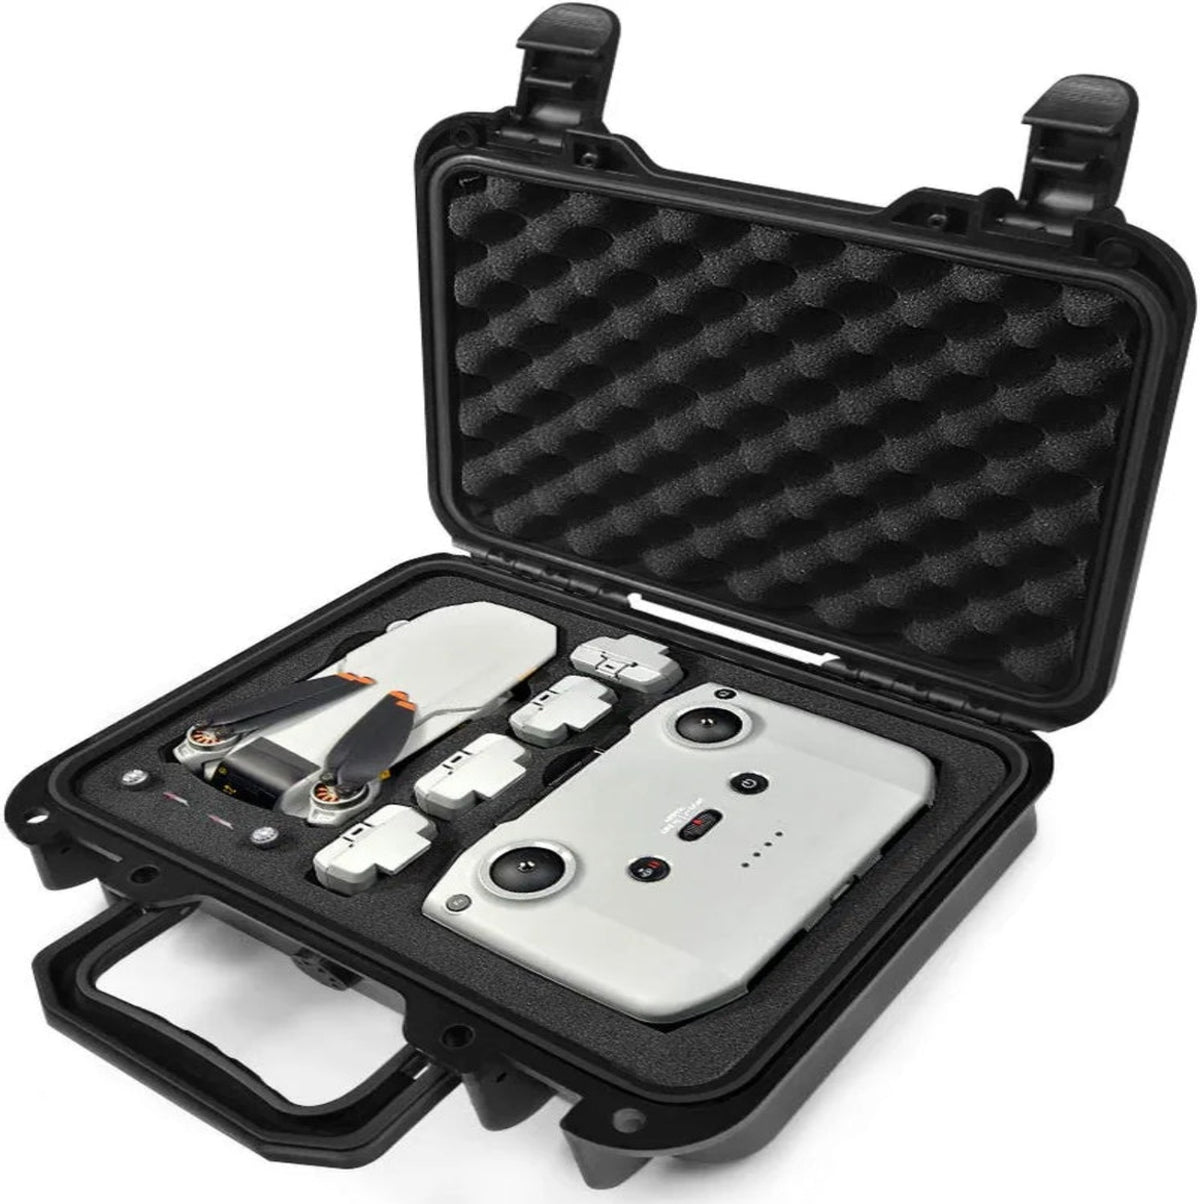 Portable Travel Waterproof Hard Case Compatible with DJI Mini 2 Drone and Accessories